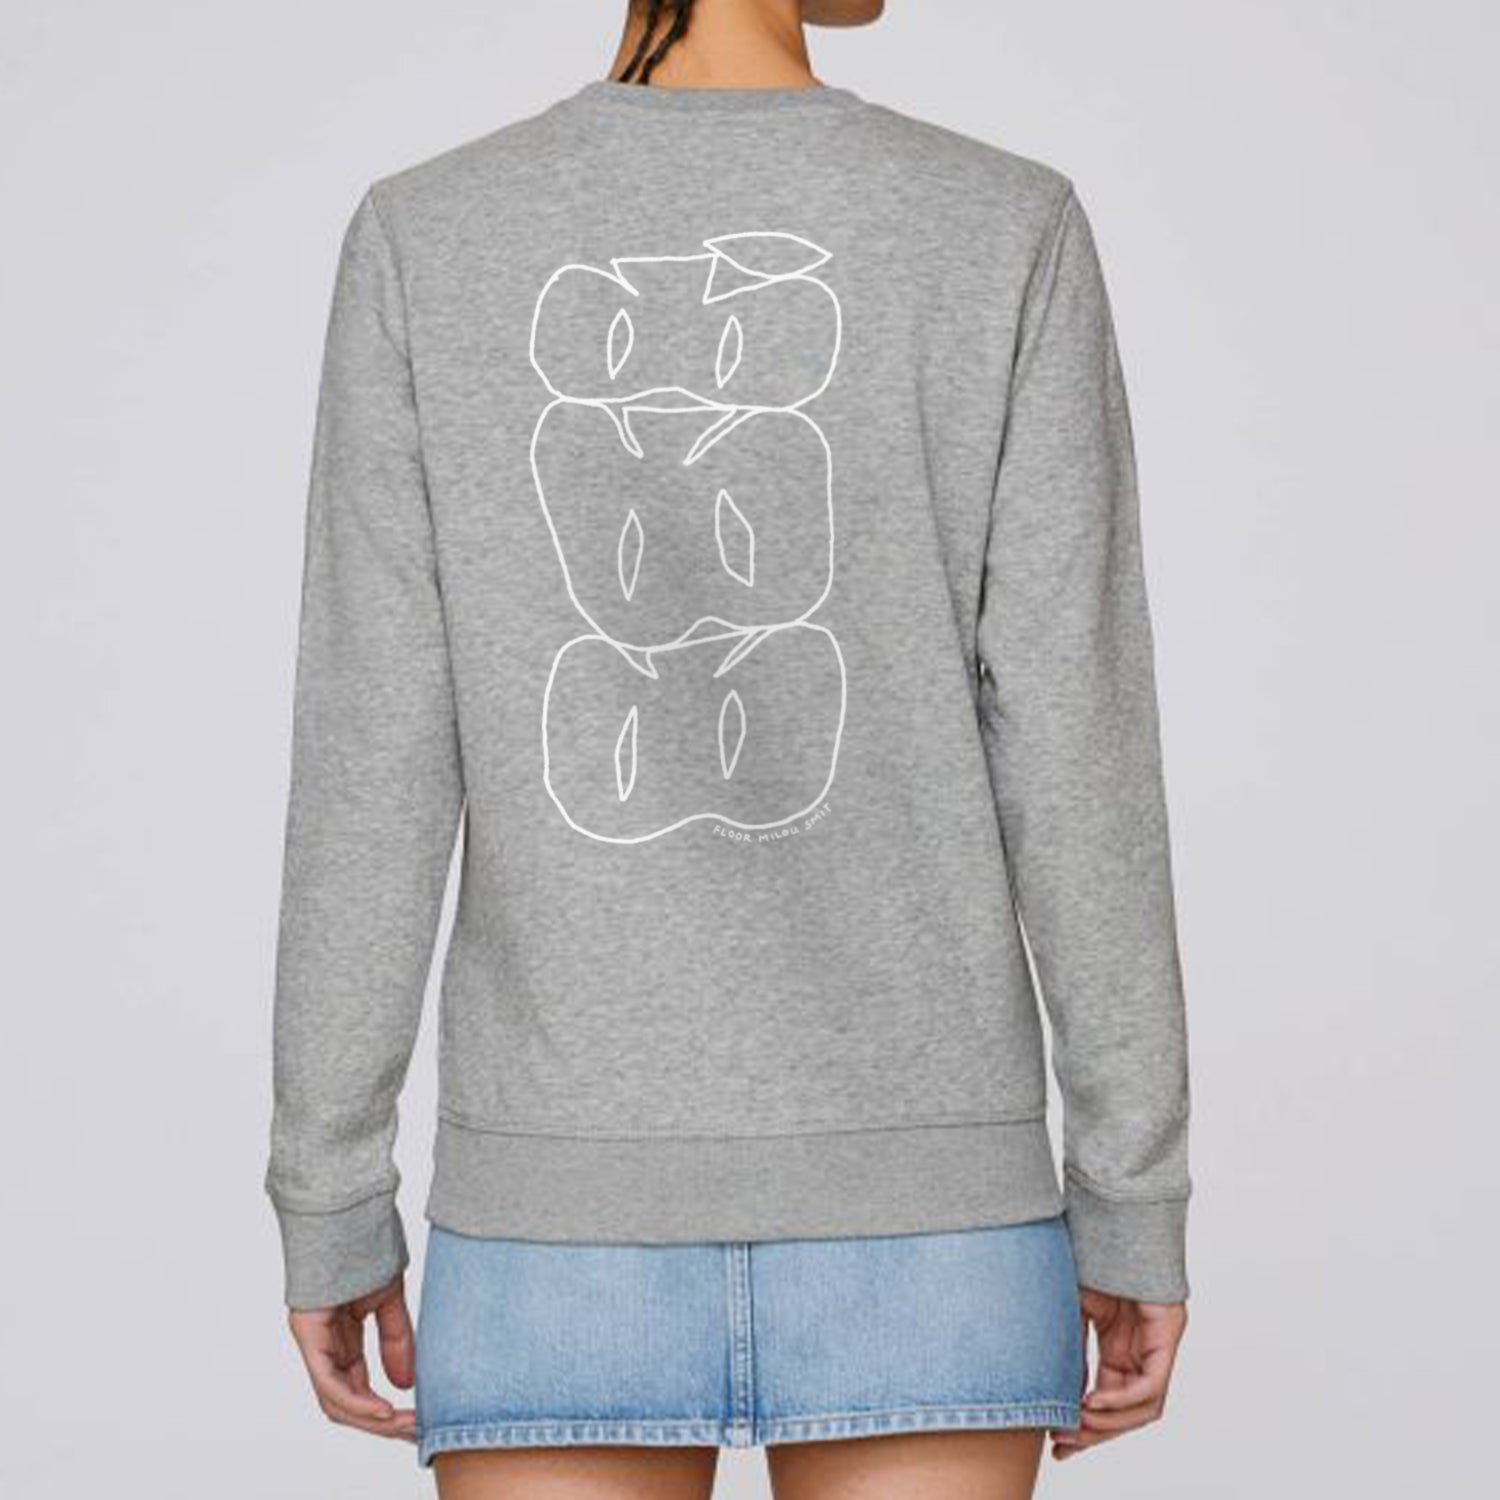 Photo of a model wearing a heather grey sweater. The print on the sweater is a white line art drawing of 3 cut apples on top of each other forming a stack.